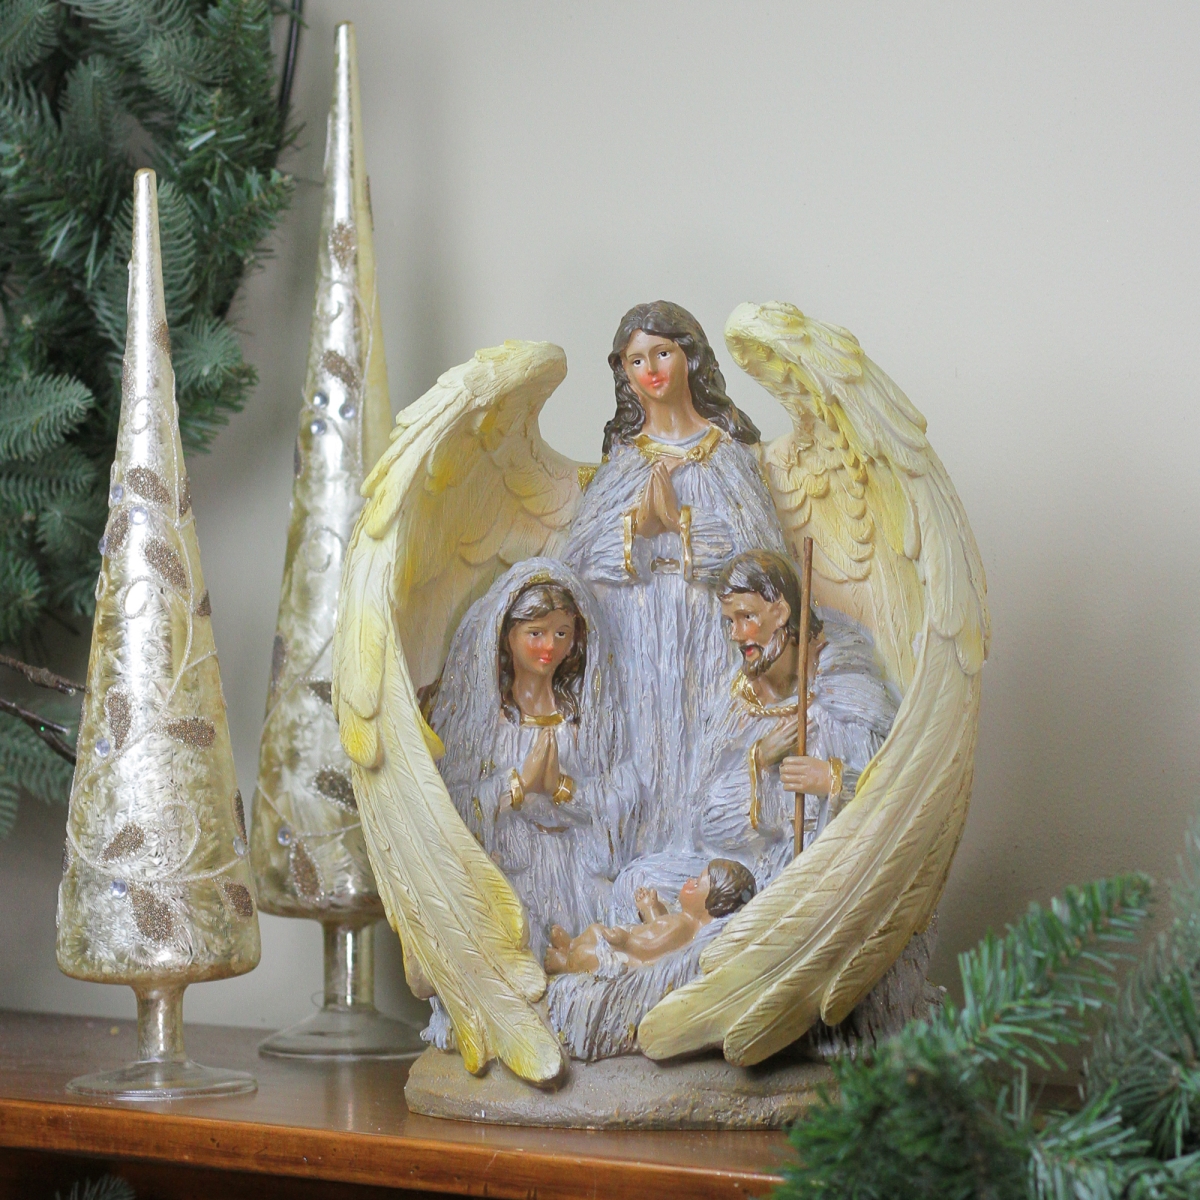 Northlight 32915450 11.25 in. Holy Family & Angel Figures Christmas Nativity Statue Decor